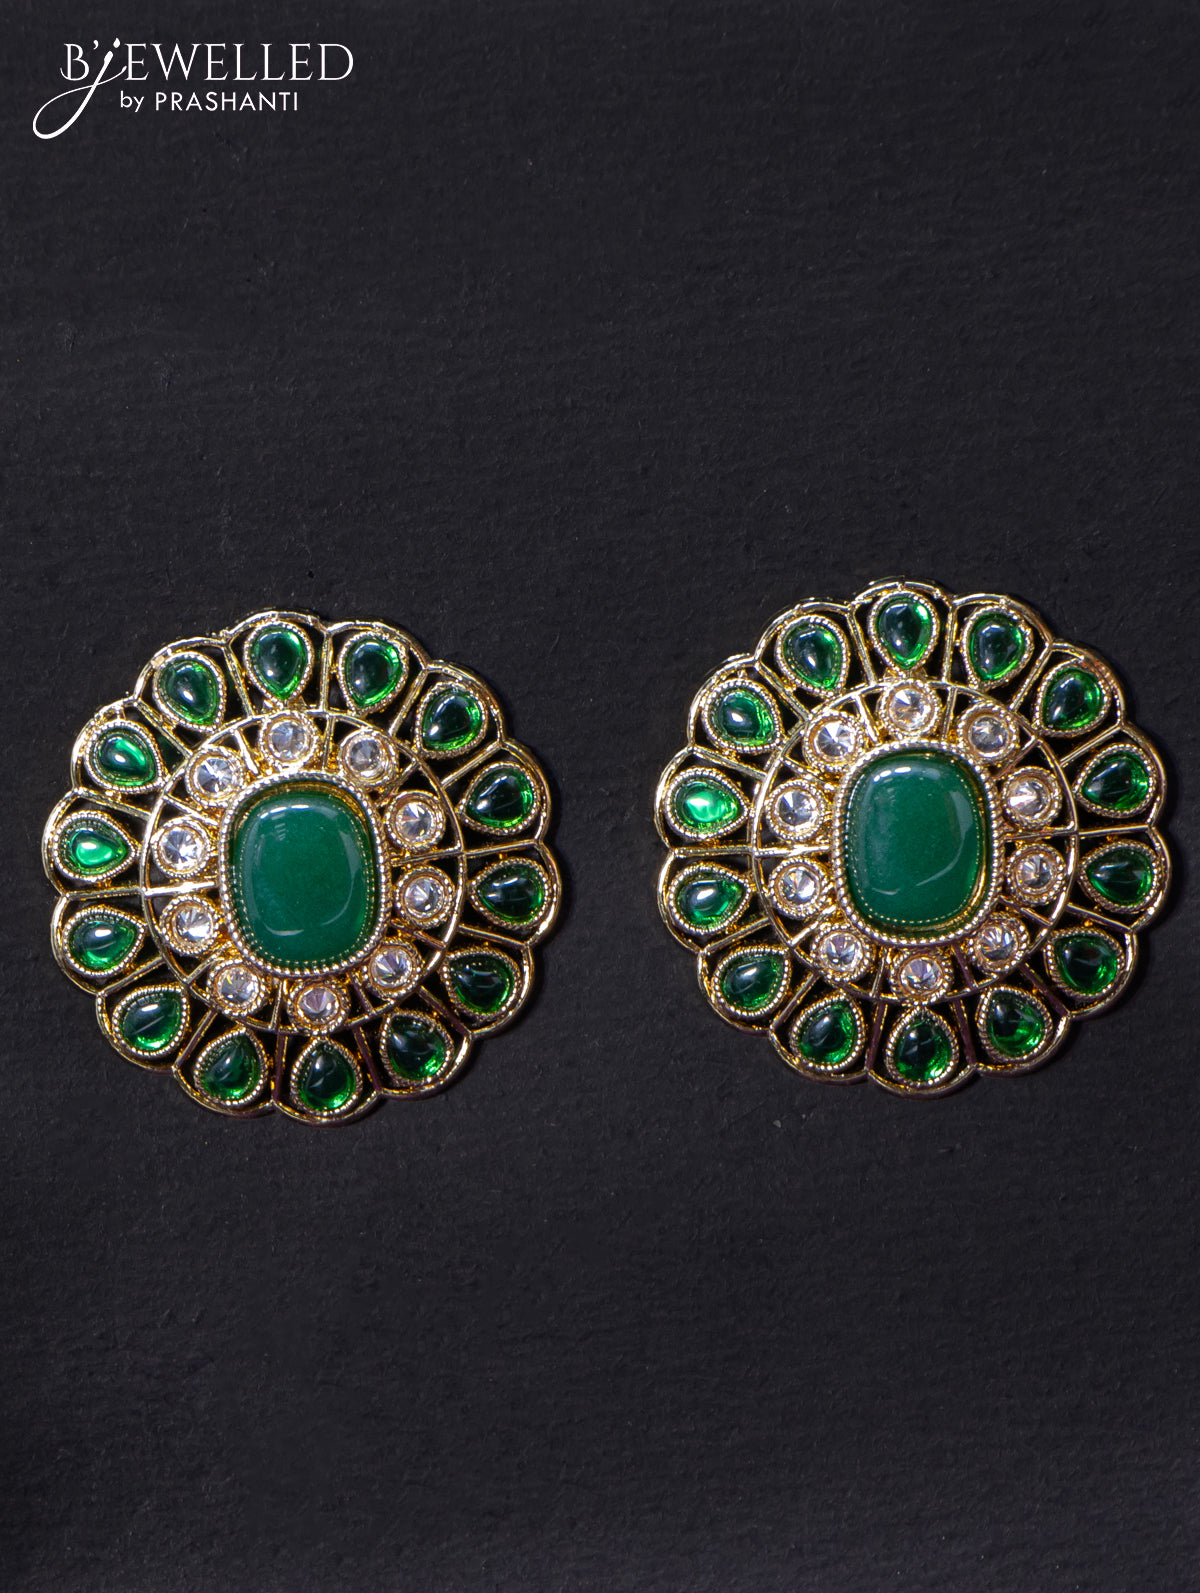 Light weight earrings with cz and emerald stone